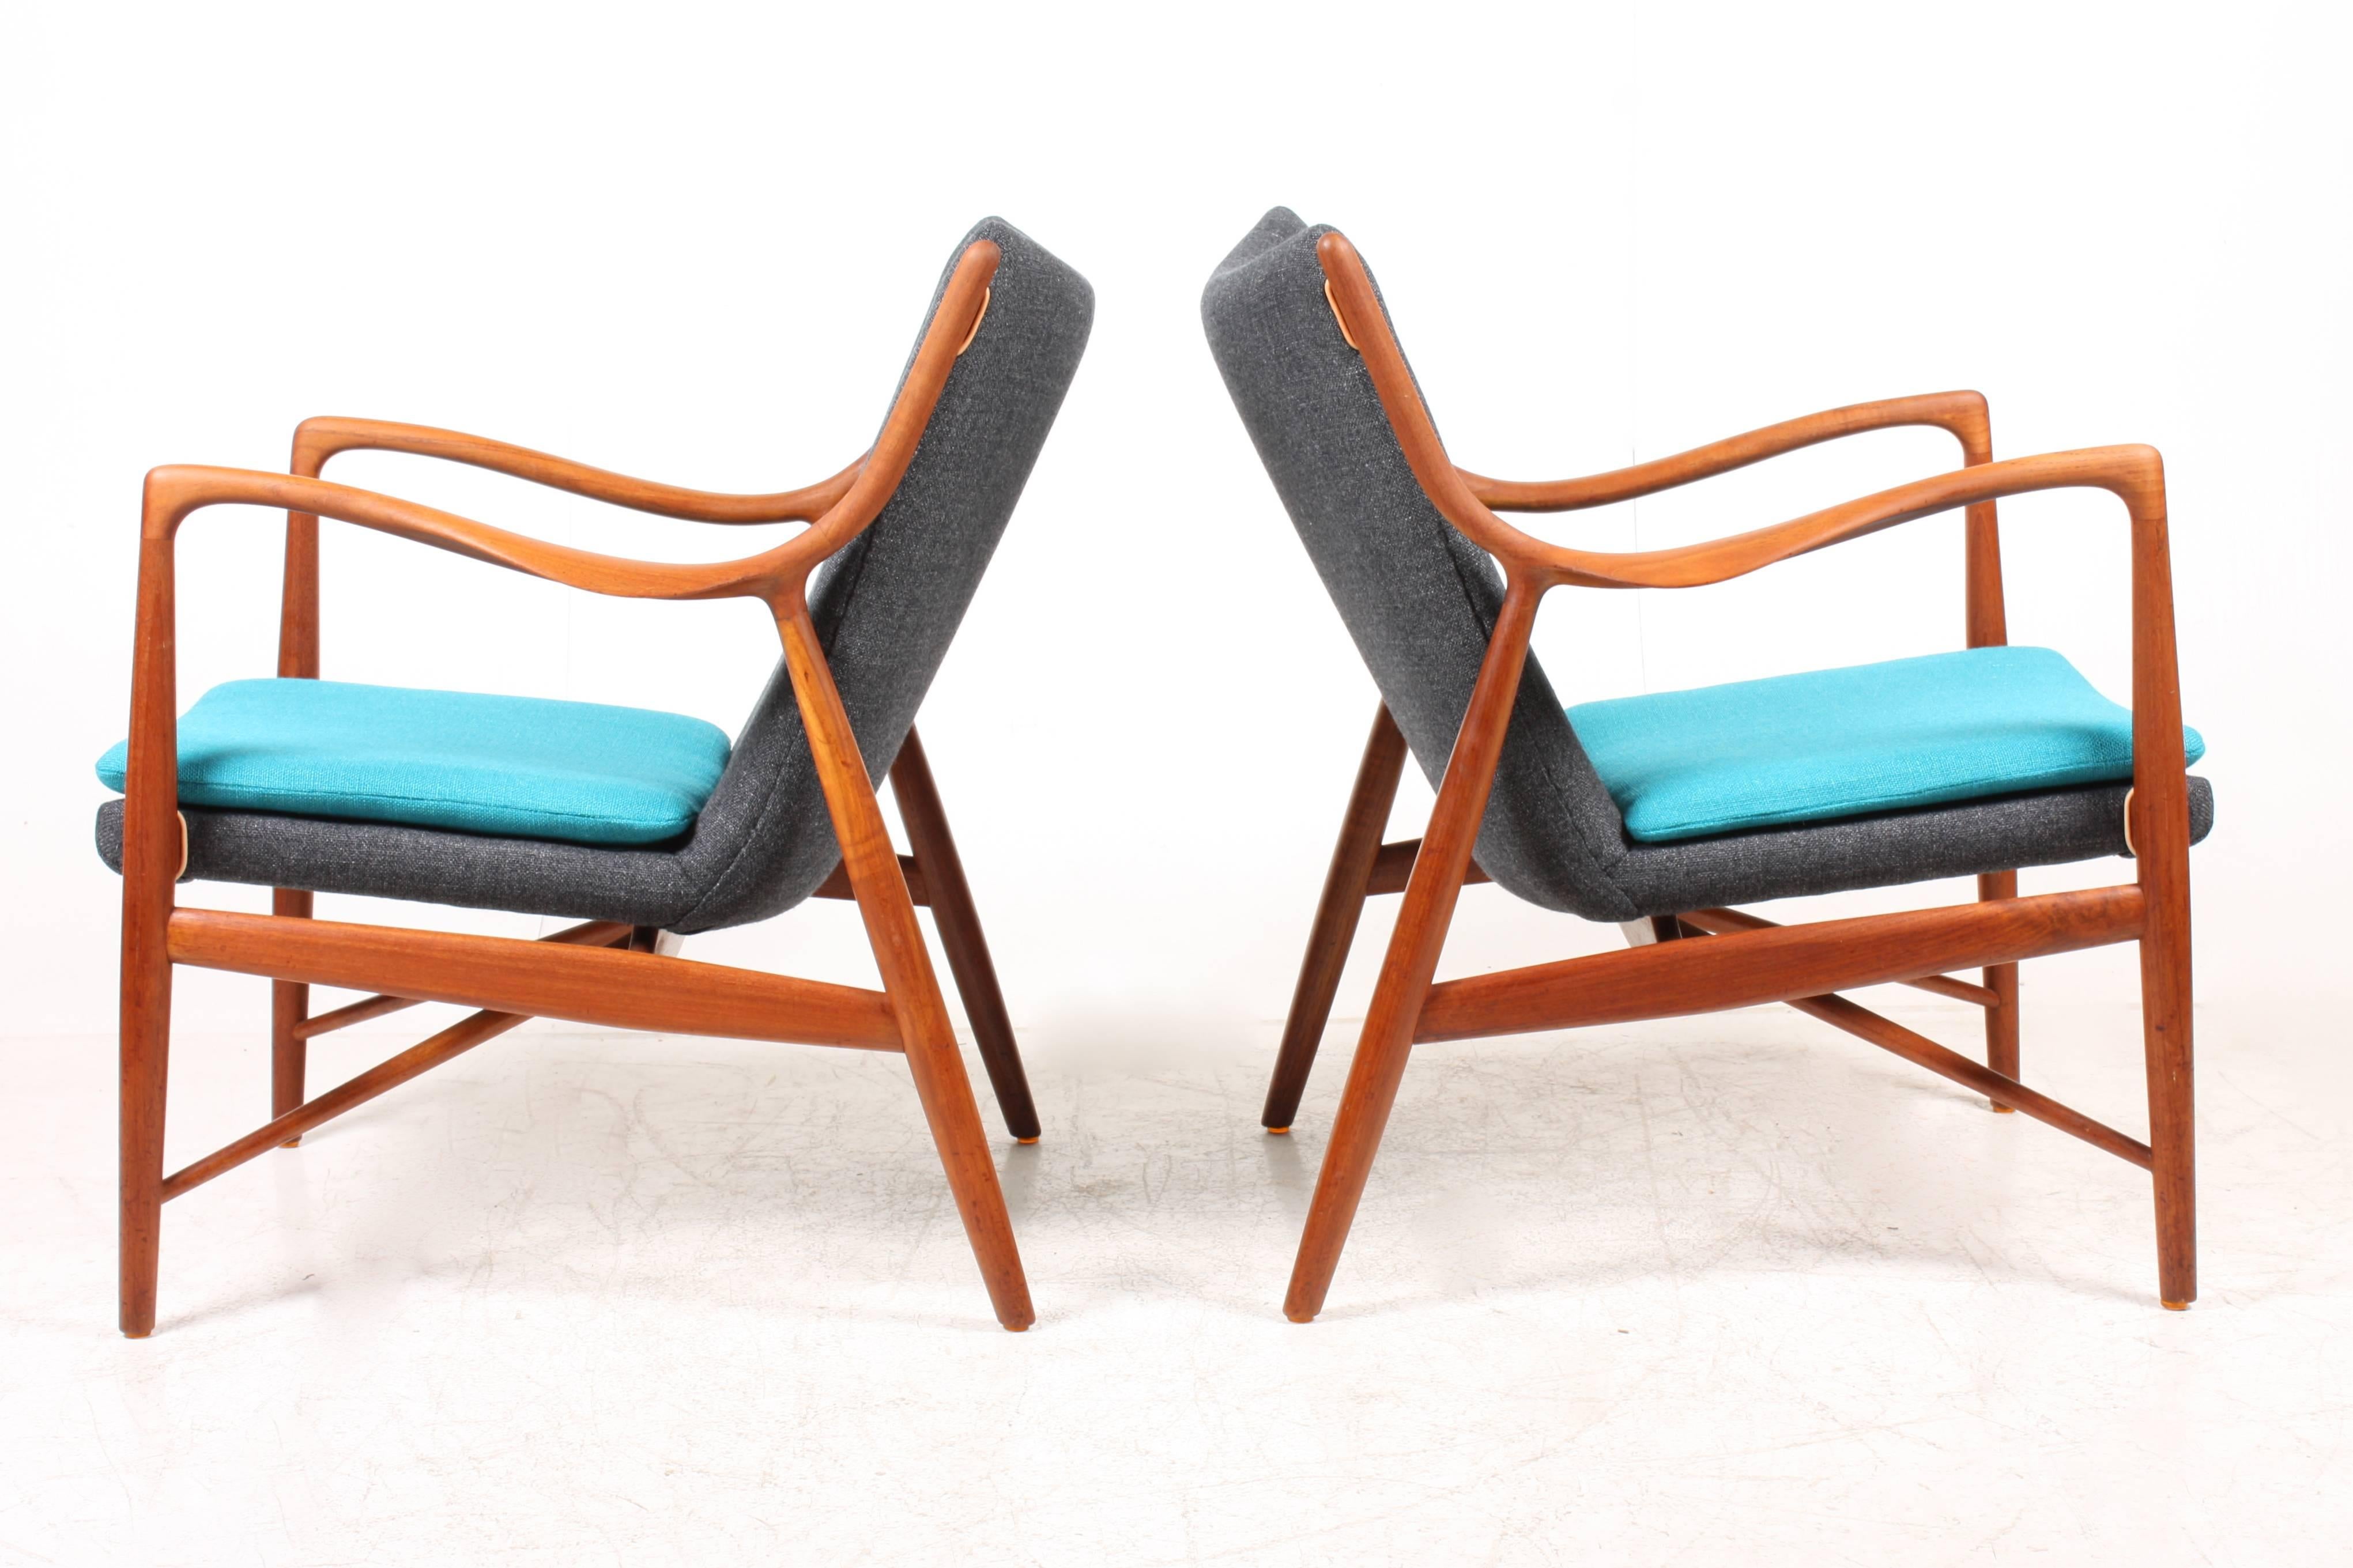 Pair of NV45 lounge chairs in teak with new fabric upholstery. Designed by Maa. Finn Juhl for Niels Vodder cabinetmakers in 1945. Made in Denmark.